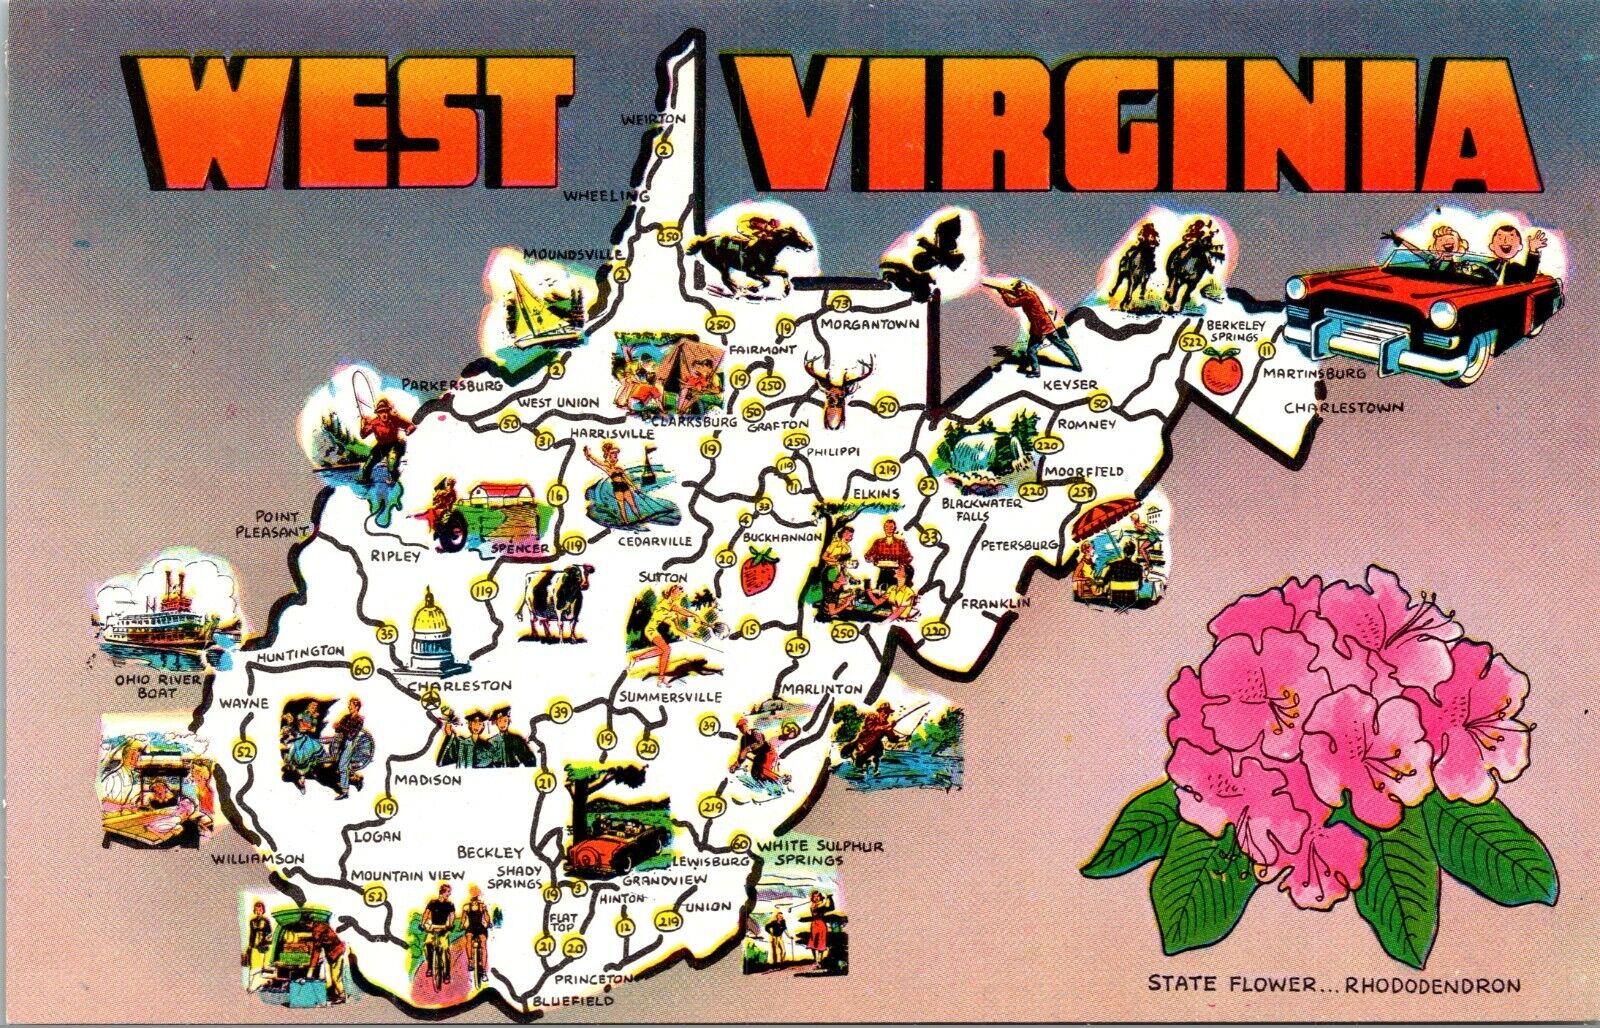 Famous Attractions Map of West Virginia Vintage Postcard